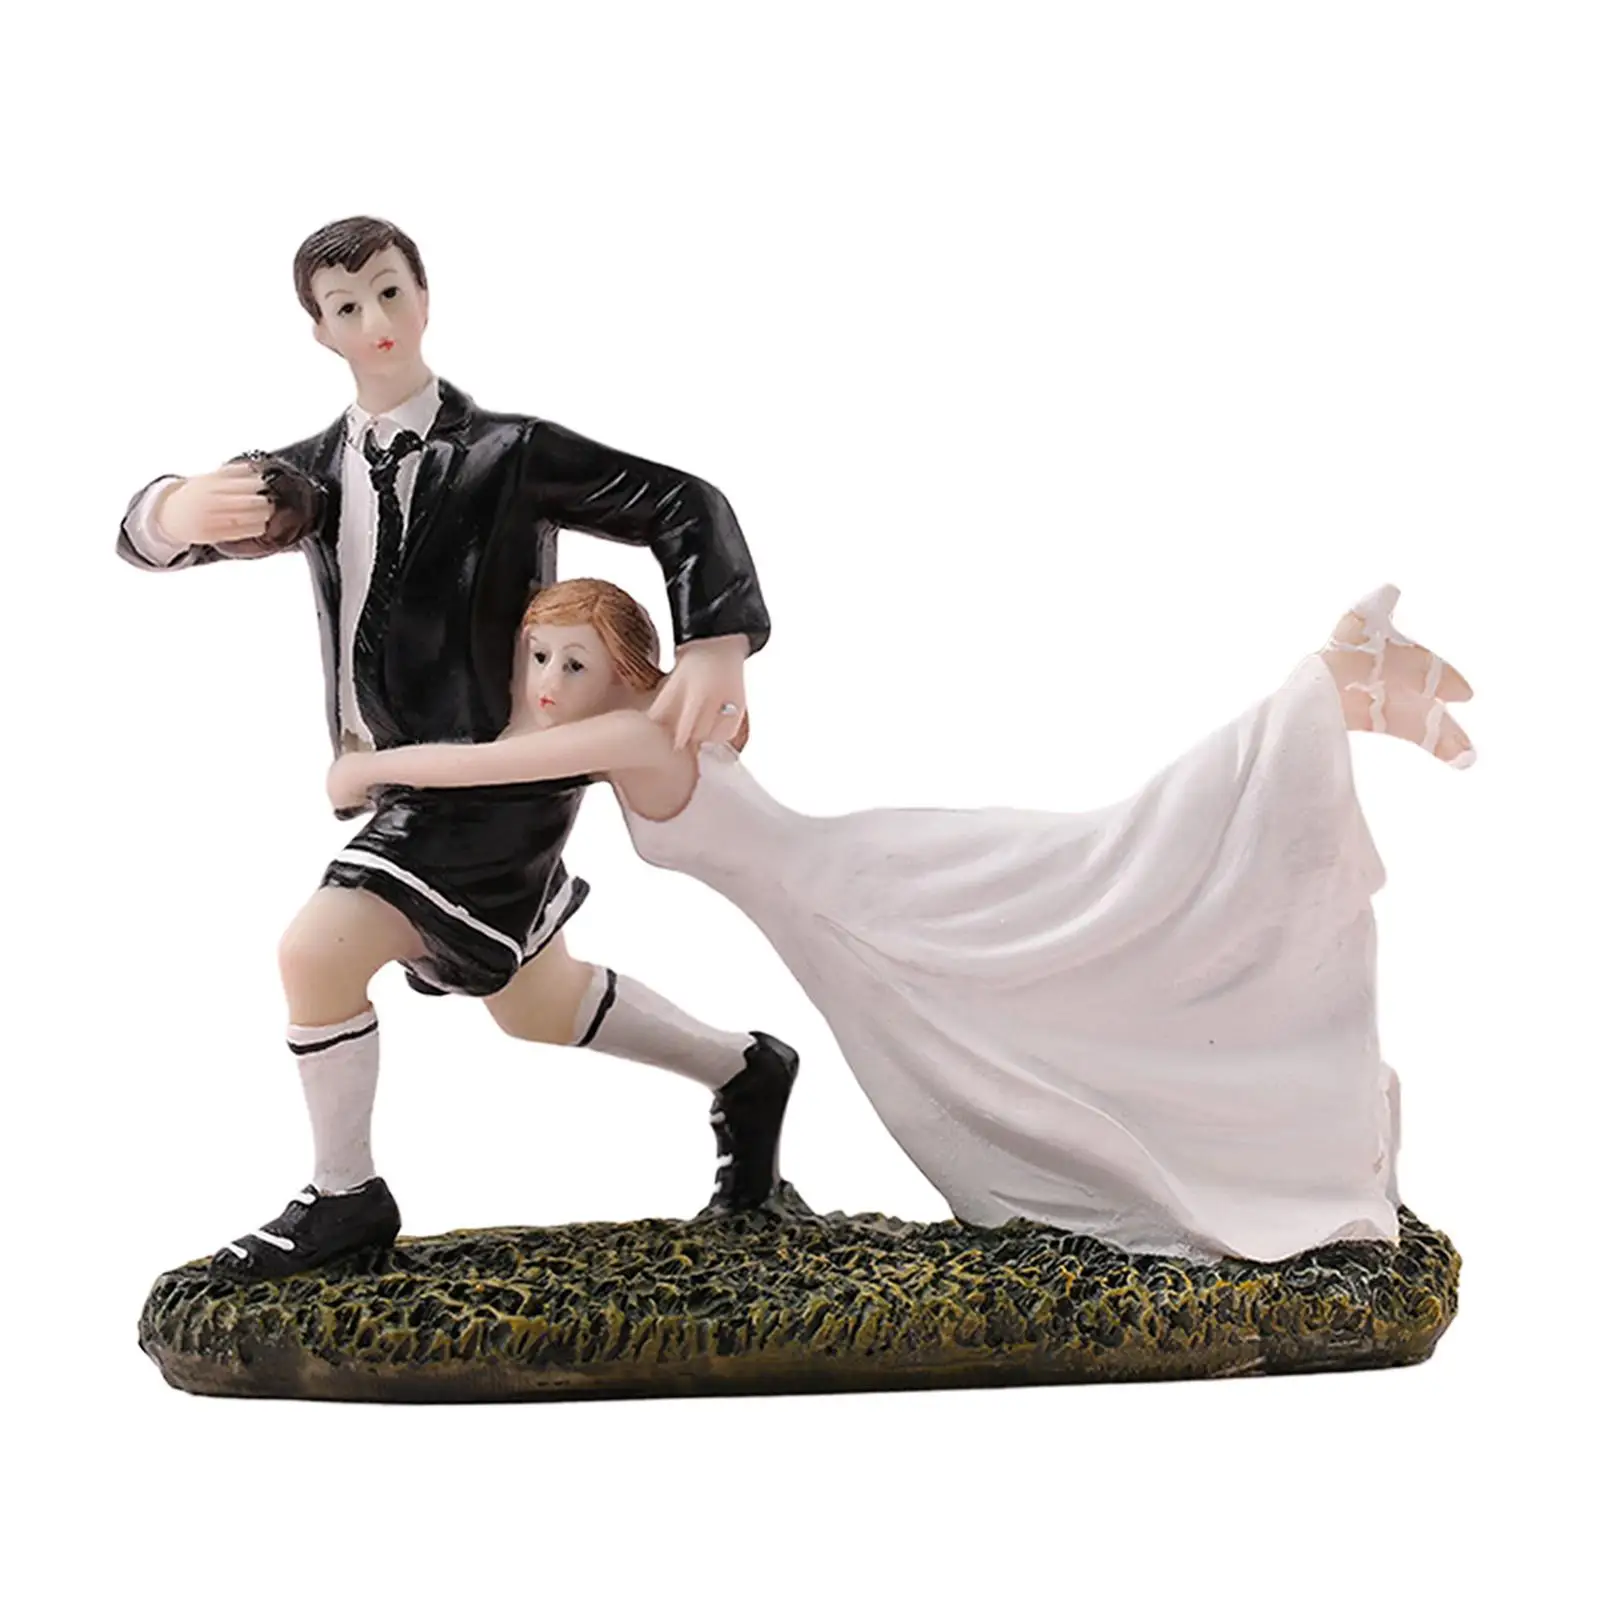 Wedding Cake Topper Bride and Groom Football Figurine for Tabletop Ceremony